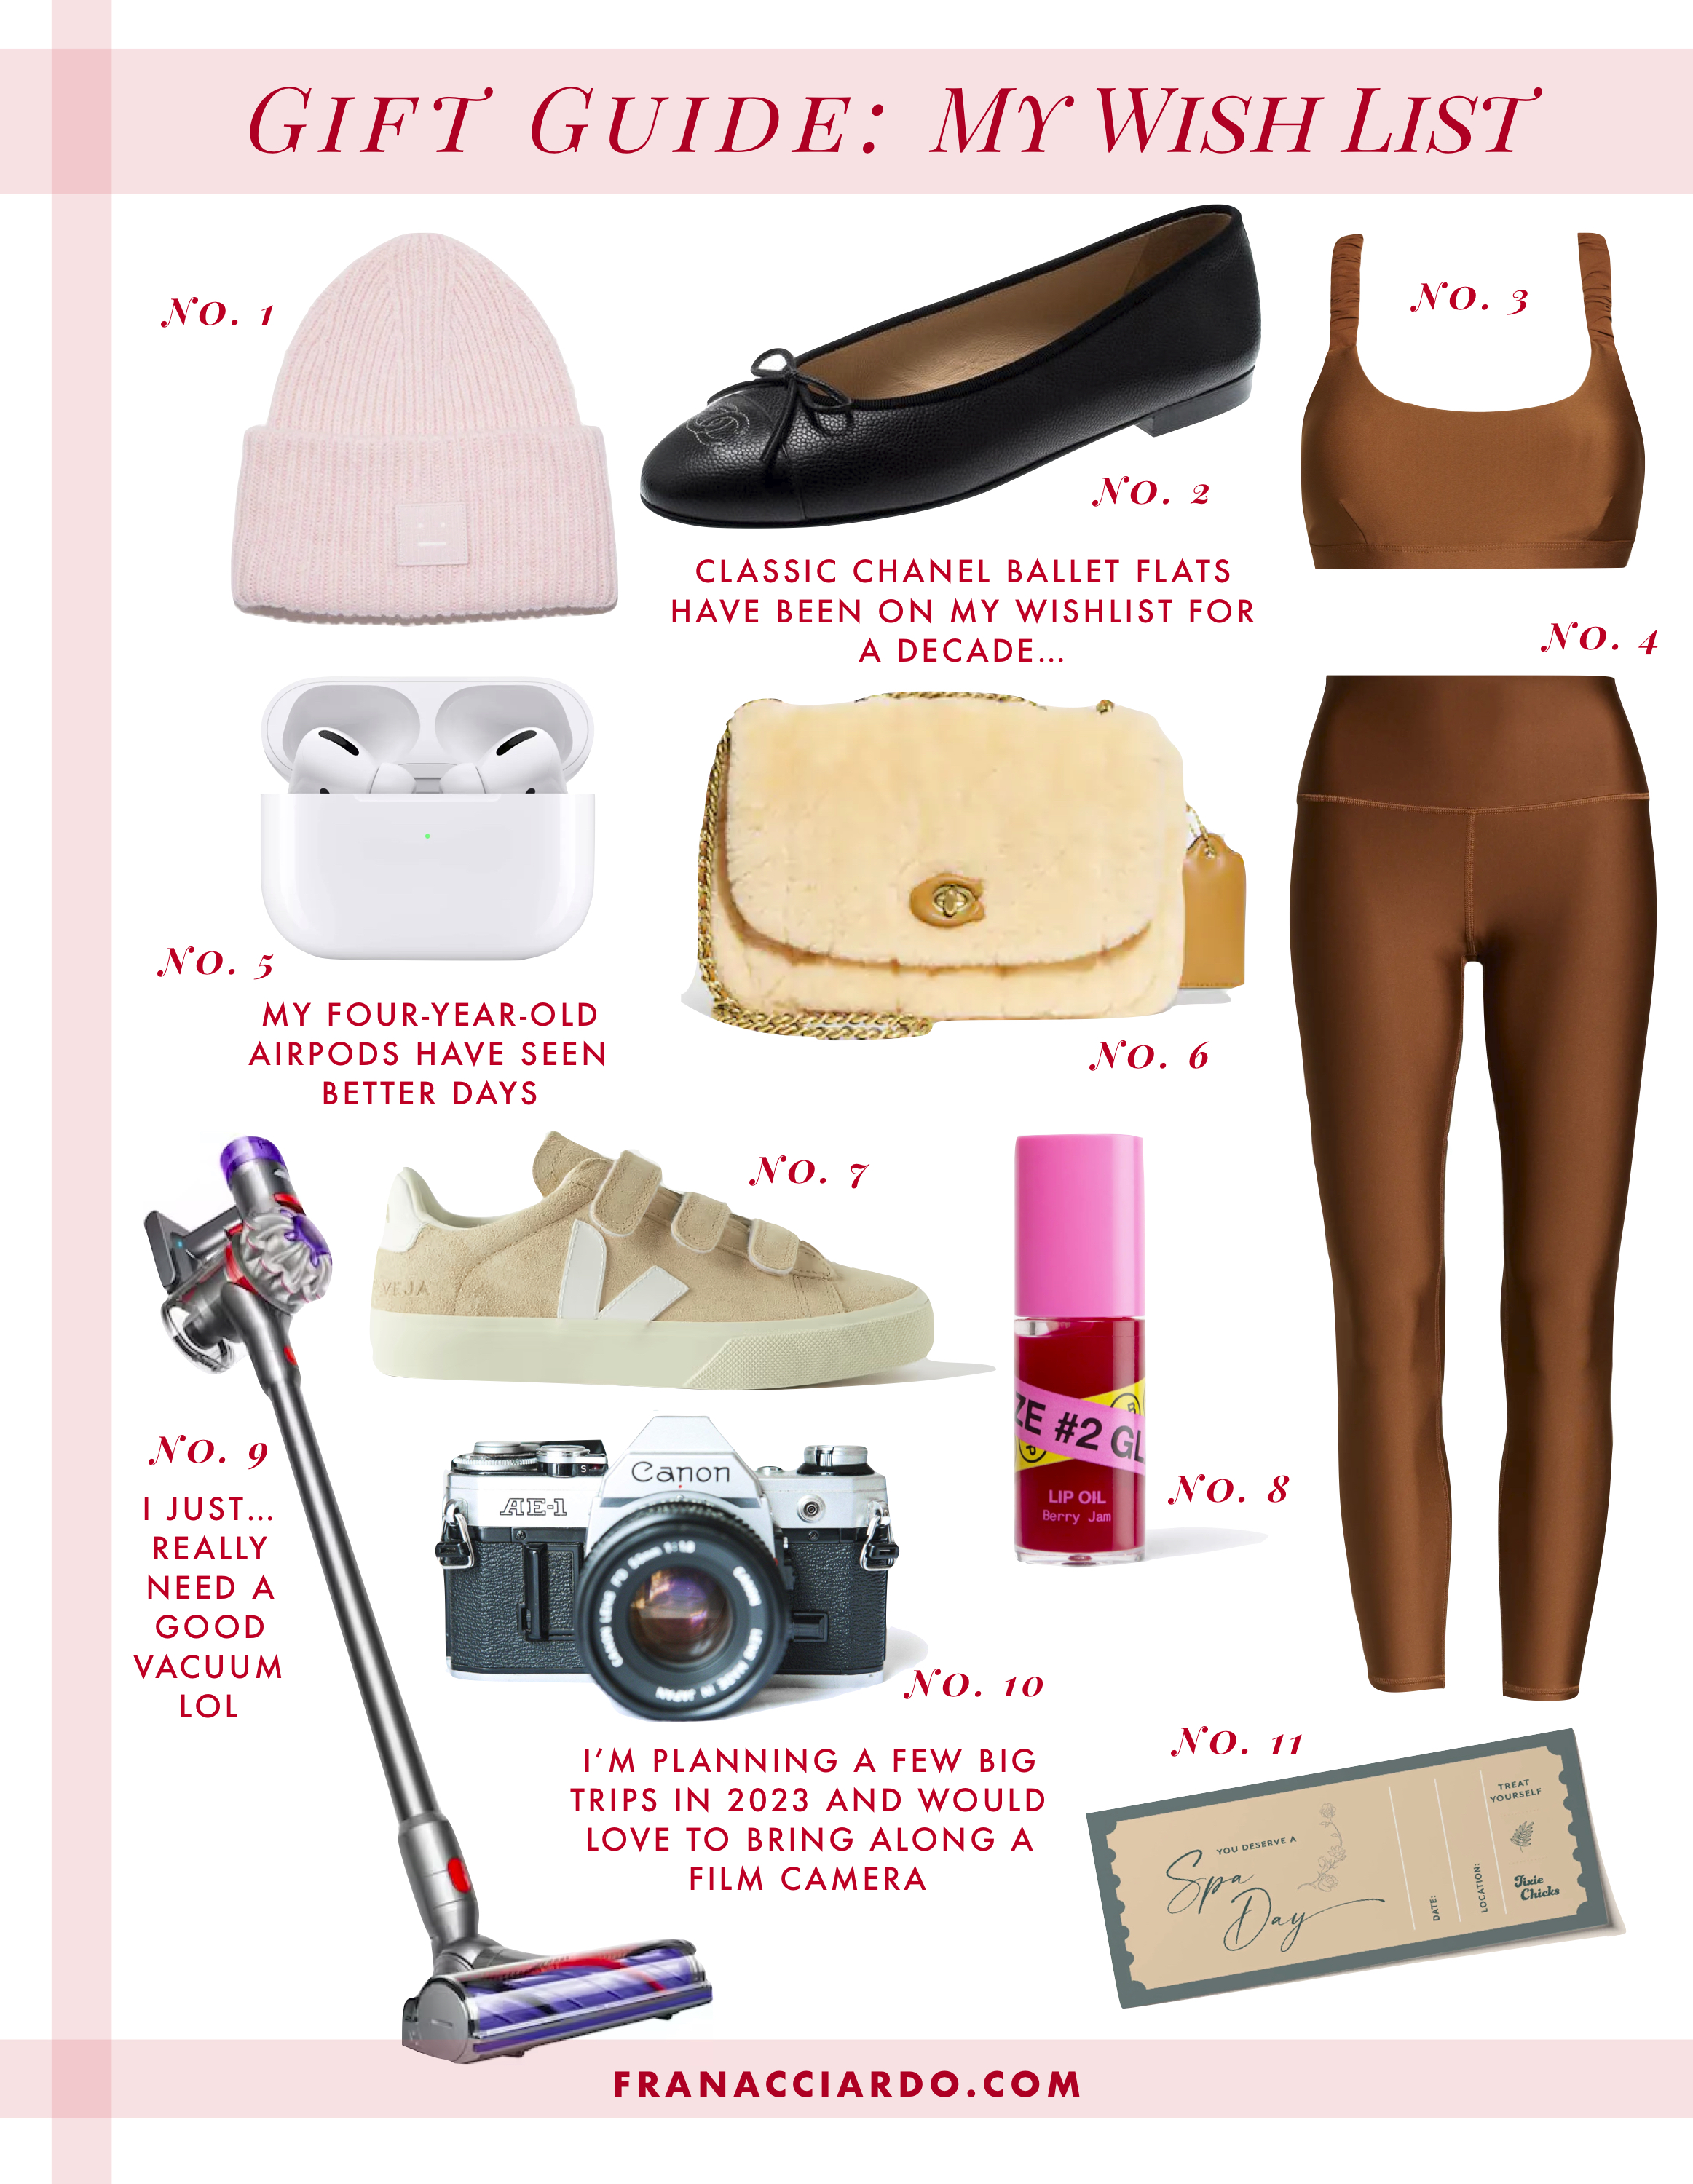 My Christmas Wishlist- A Gift Guide for Her